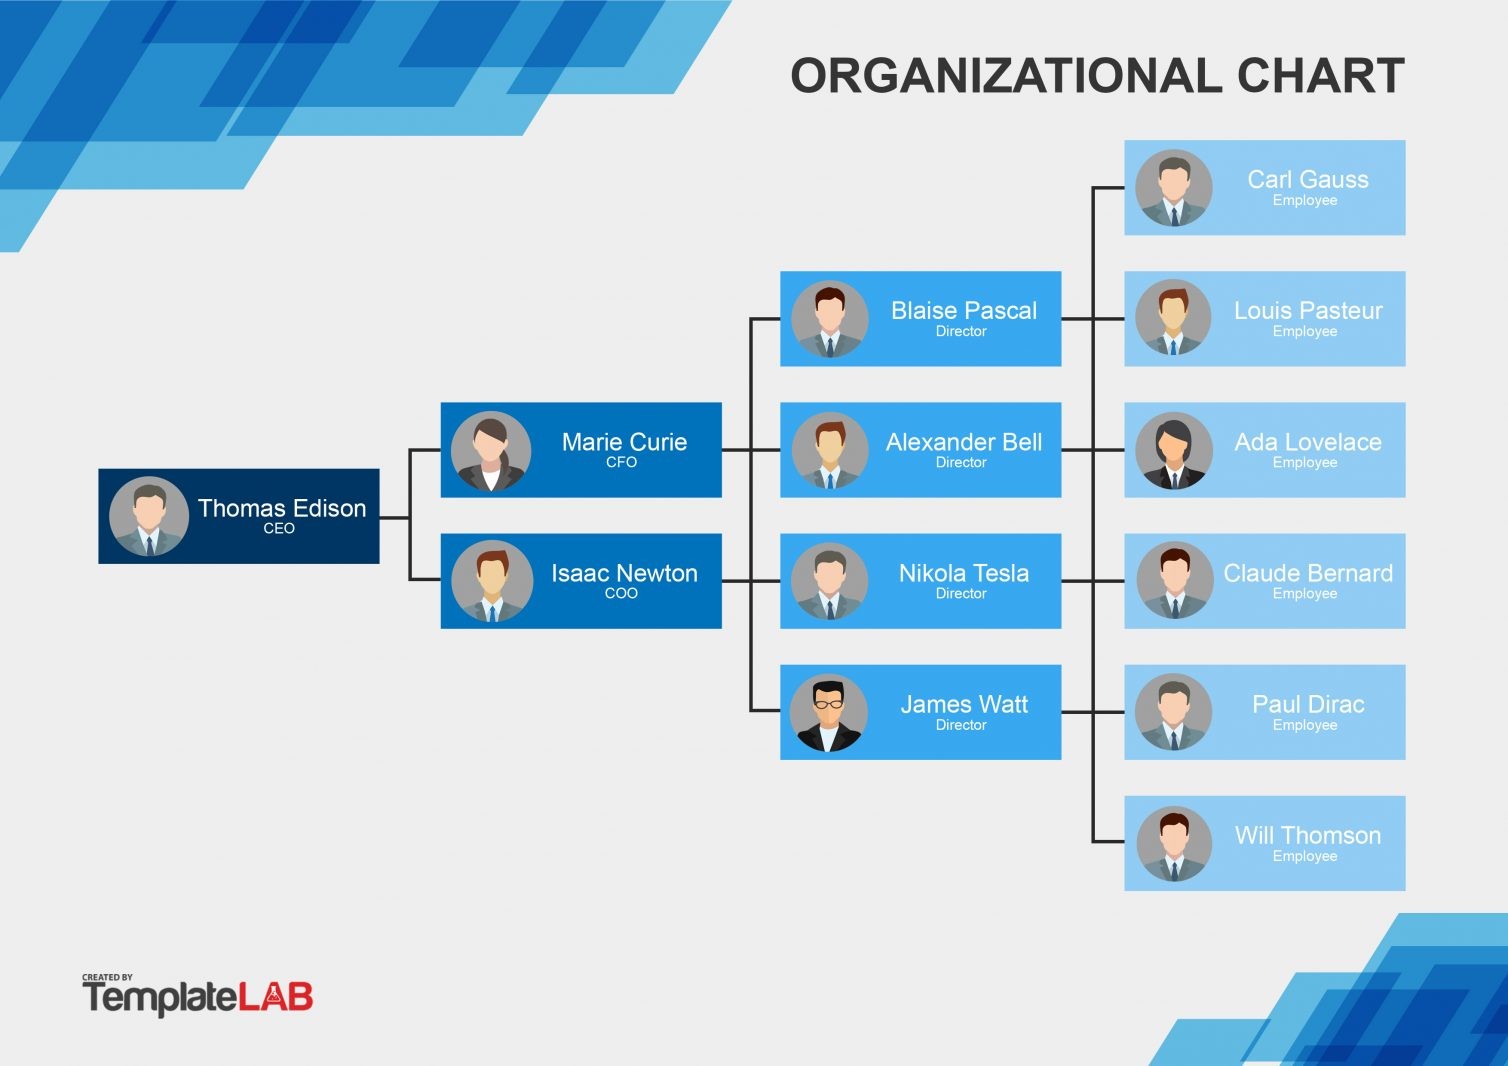 41 Organizational Chart Templates (Word, Excel, PowerPoint ...